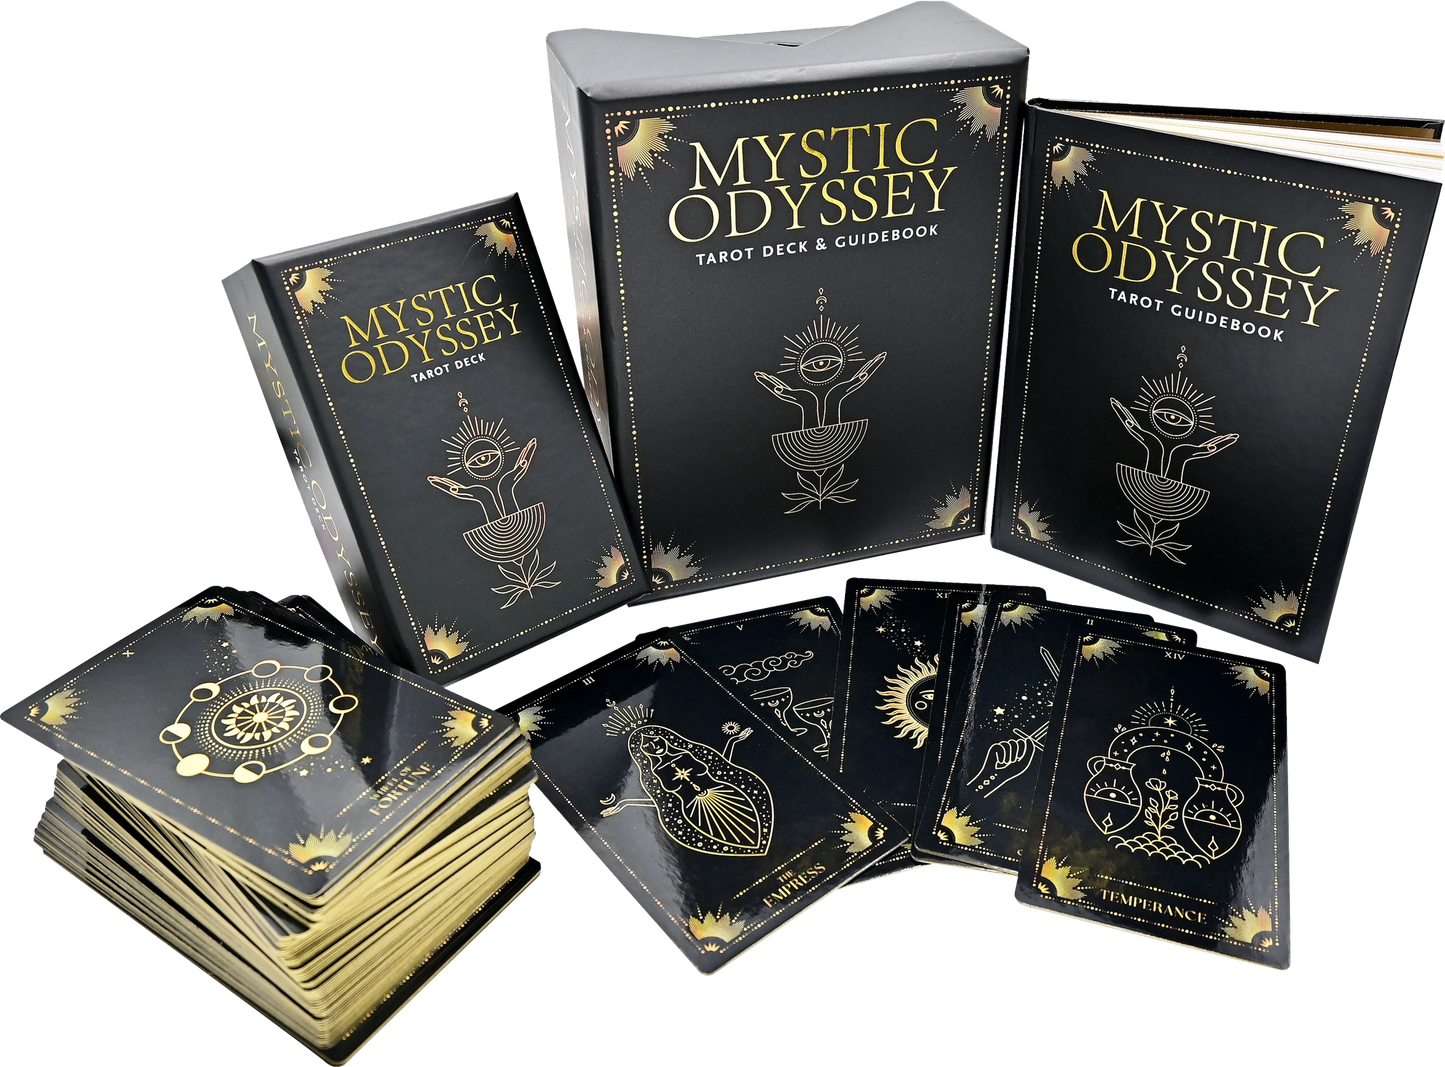 Mystic Odyssey Tarot Deck and Guide Book